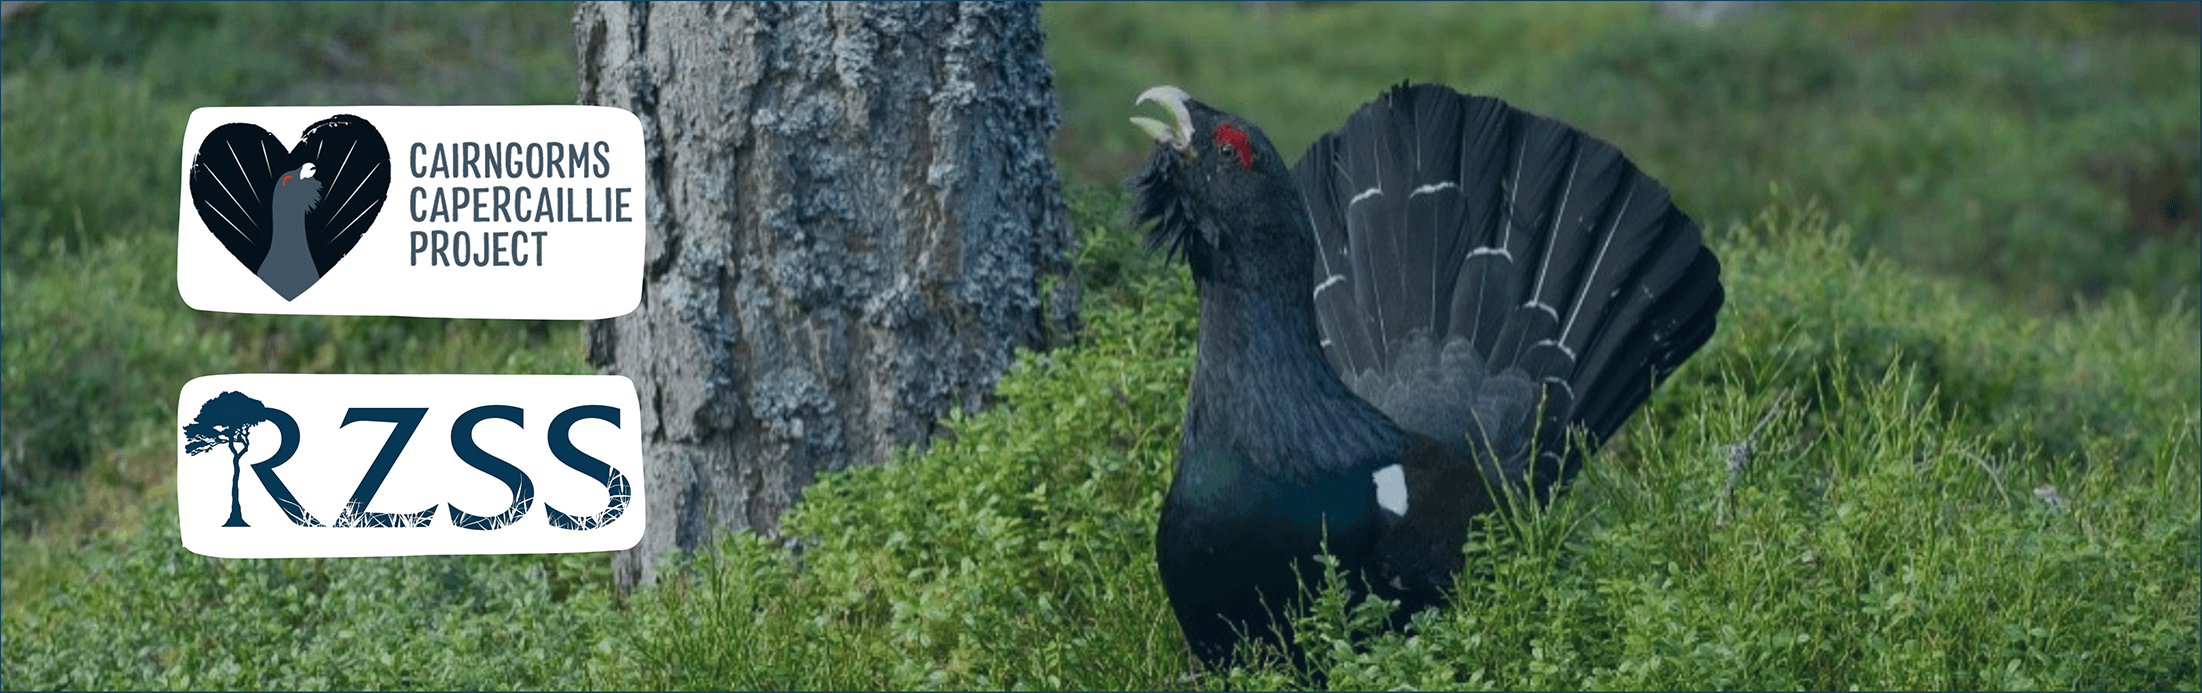 A male capercaillie calls from the forest, the Cairngorms Capercaillie Project logo, a capercaillie in a heart, is on the left hand side above the RZSS logo.